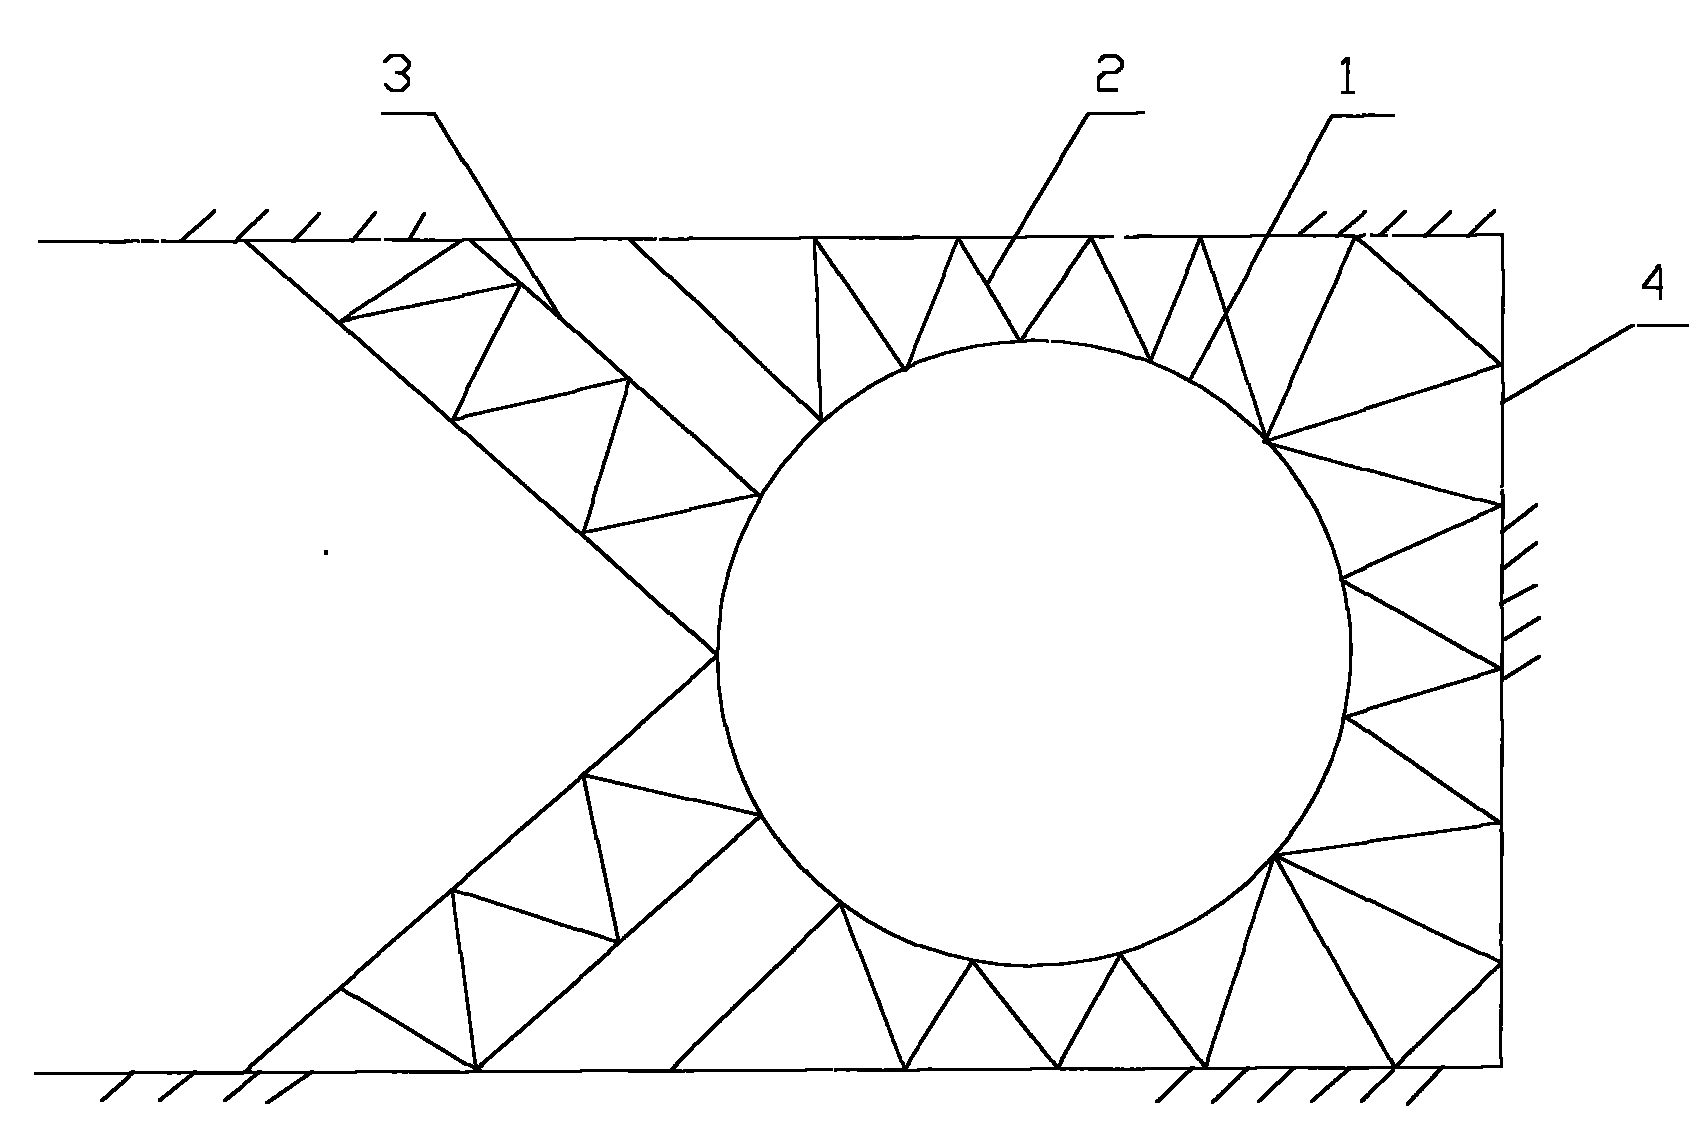 Circular inner support for deep foundation pit in unenclosed condition